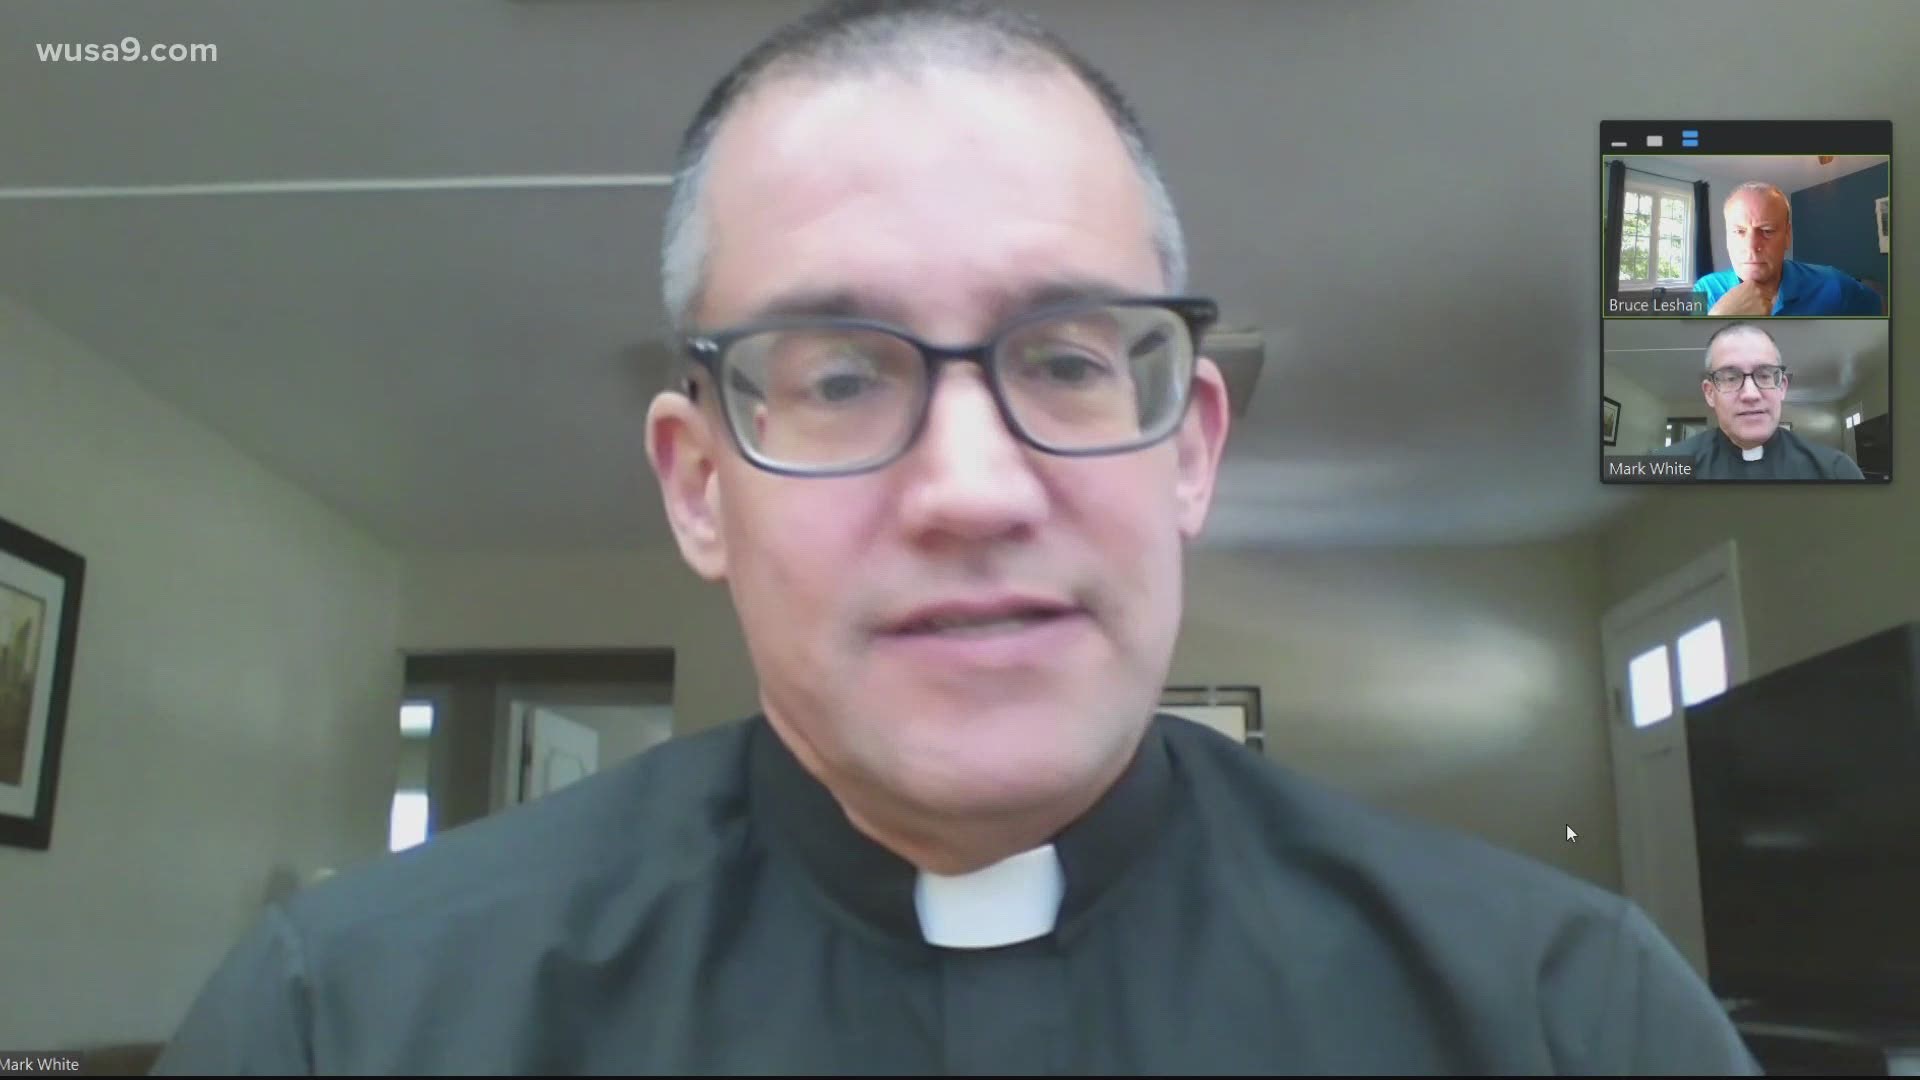 Rev. Mark White and his supporters are coming to DC to appeal to the Pope's representative for help.